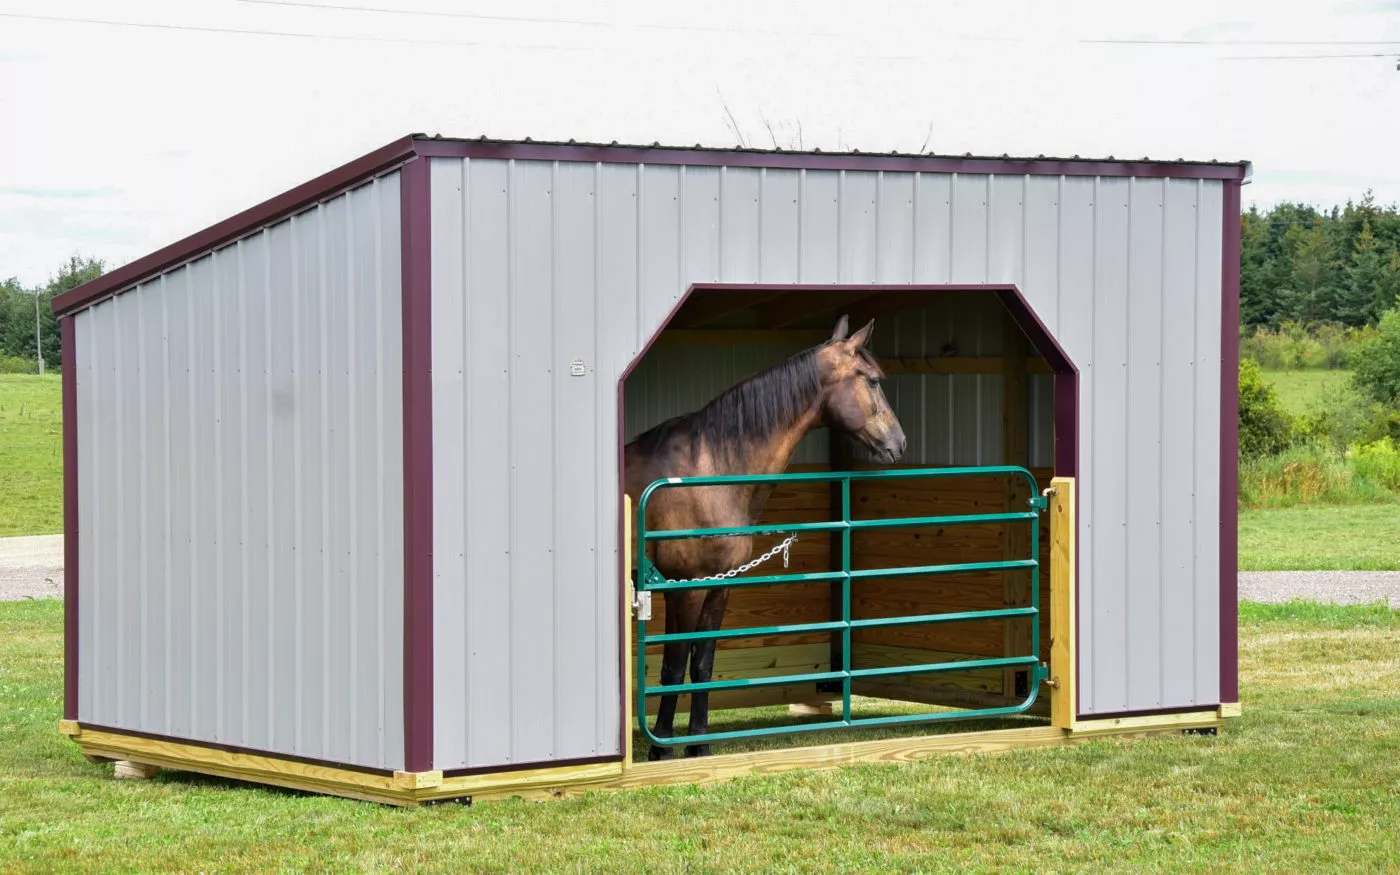 Horse Shelters For Sale In Sears, Michigan